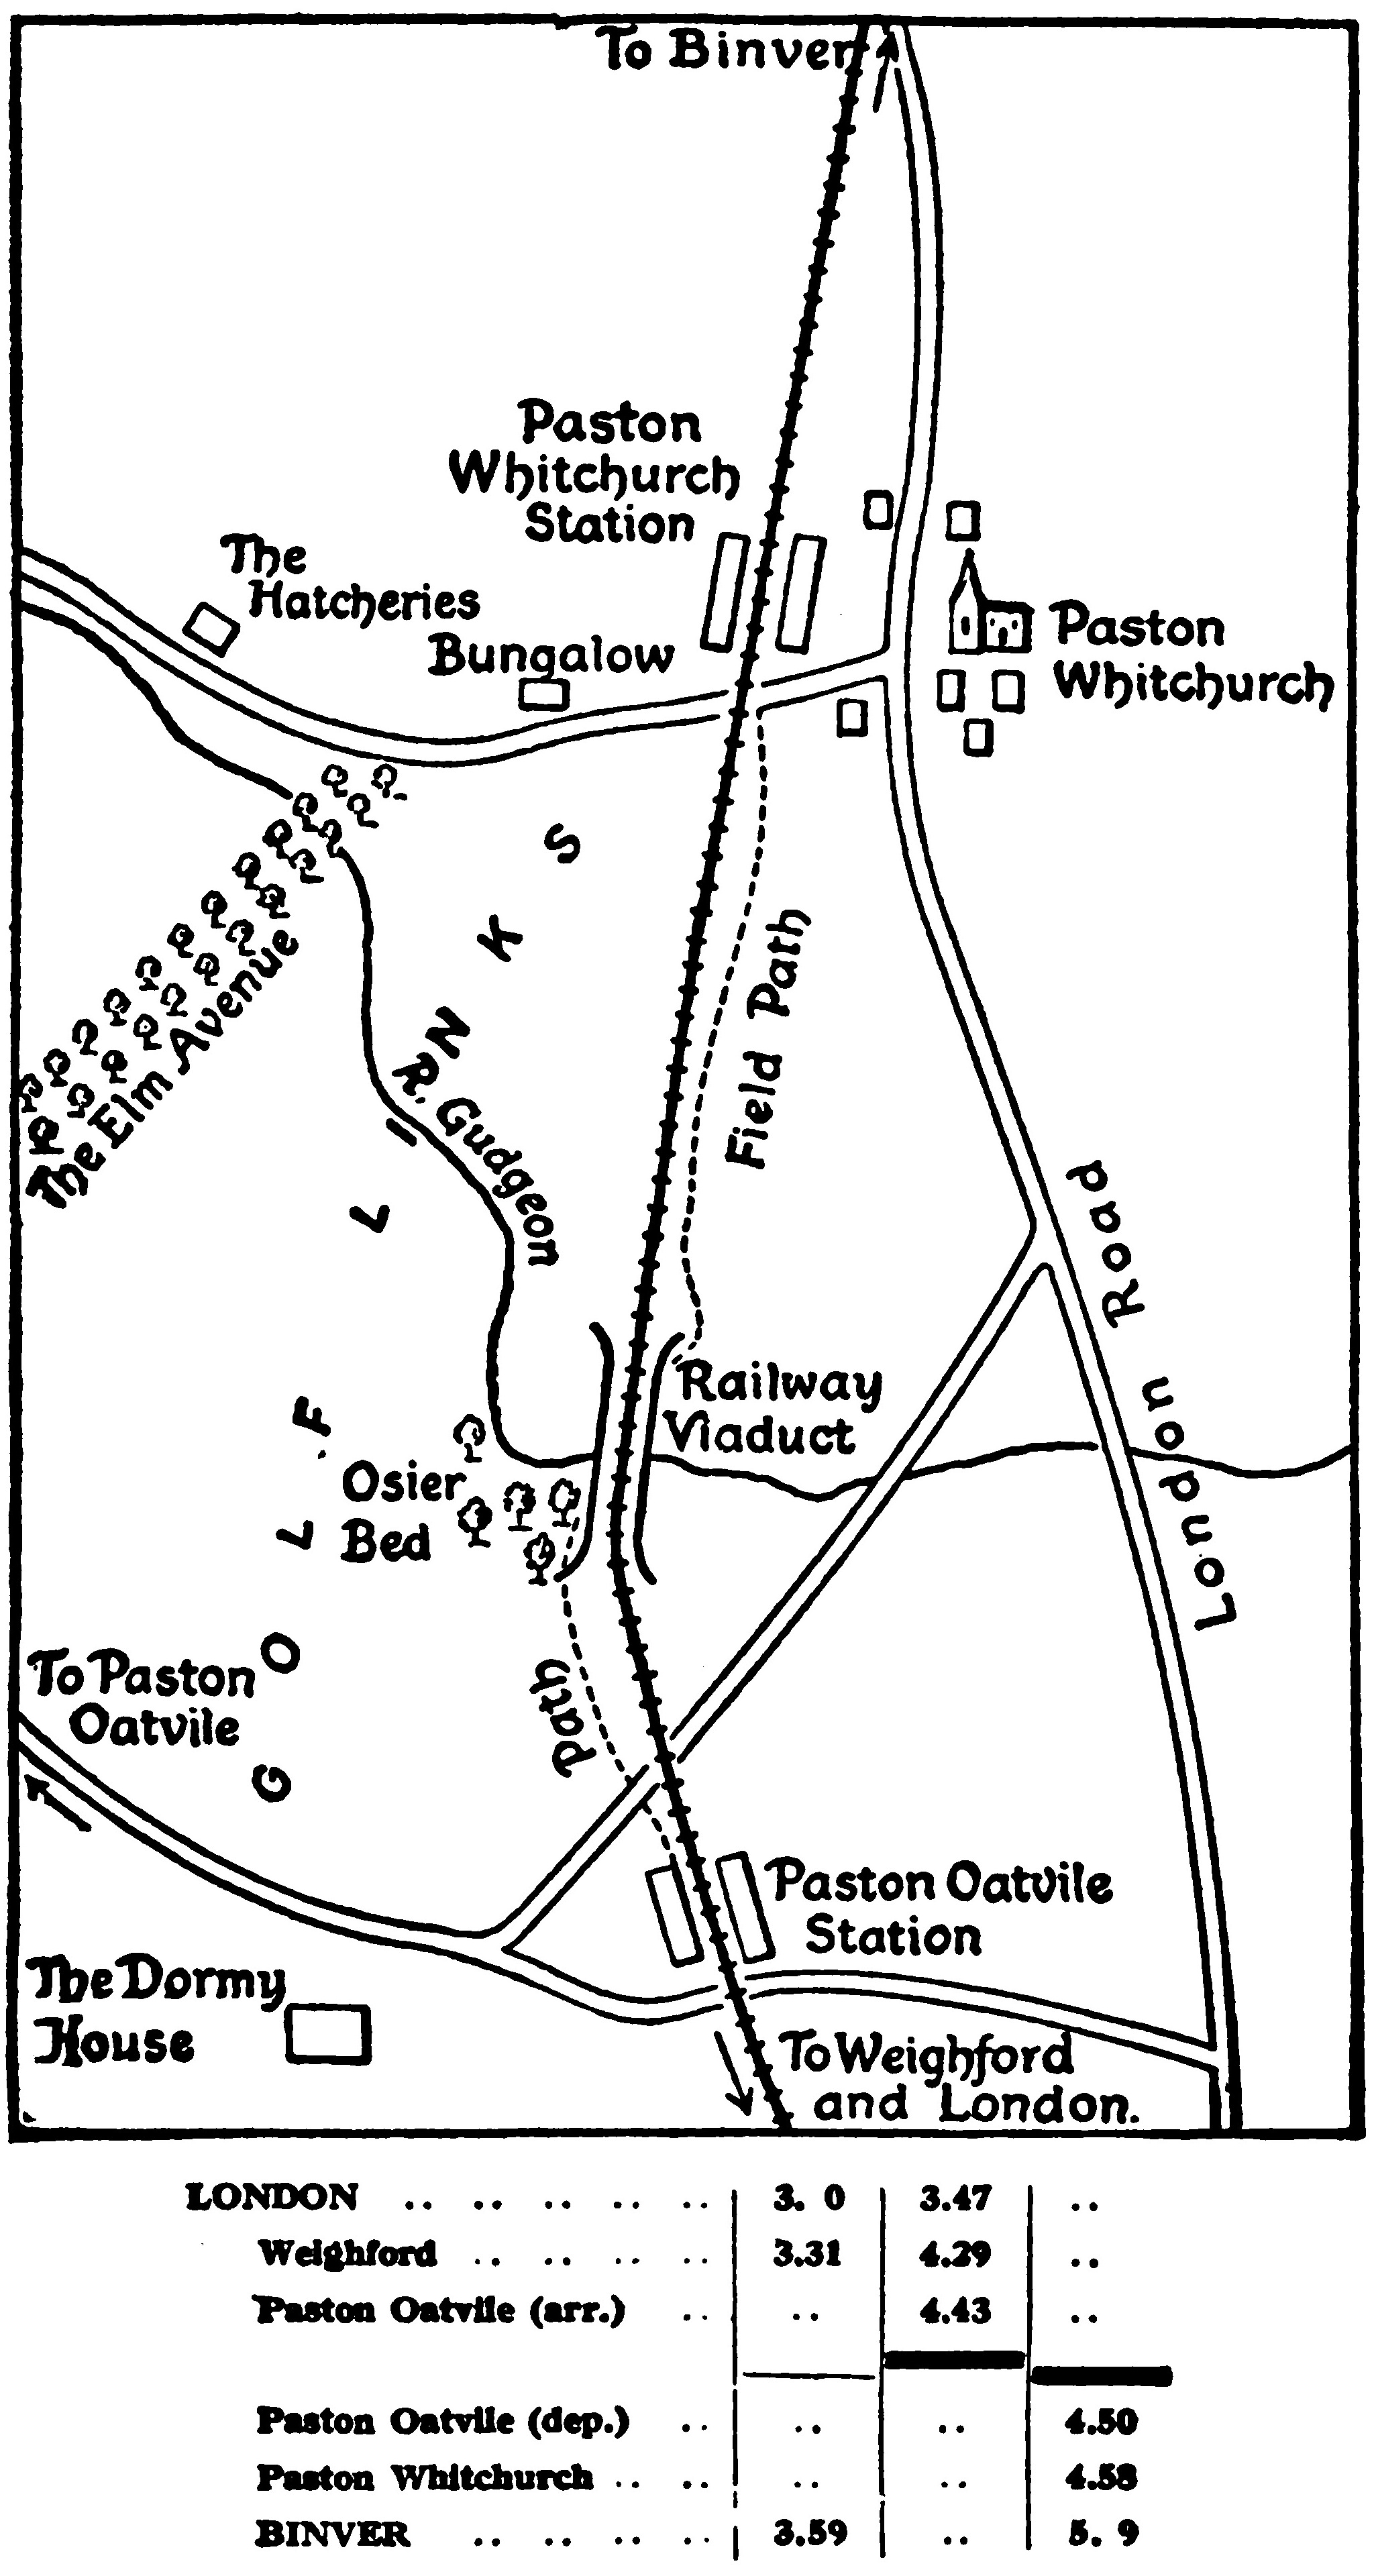 A map showing the railway line between Paston Oatvile station and Paston Whitchurch station, and the viaduct where the railroad crosses the river and the golf links. The Dormy House is situated nearer to Paston Oatvile, while the Hatcheries is close by Paston Whitchurch. A railway timetable shows that the 3 o’clock train from London arrives in Binver at 3.59 without stopping at either station, while the 3.47 London train ends at the Paston Oatvile station at 4.43, while another train departs Paston Oatvile at 4.59 for Binver.